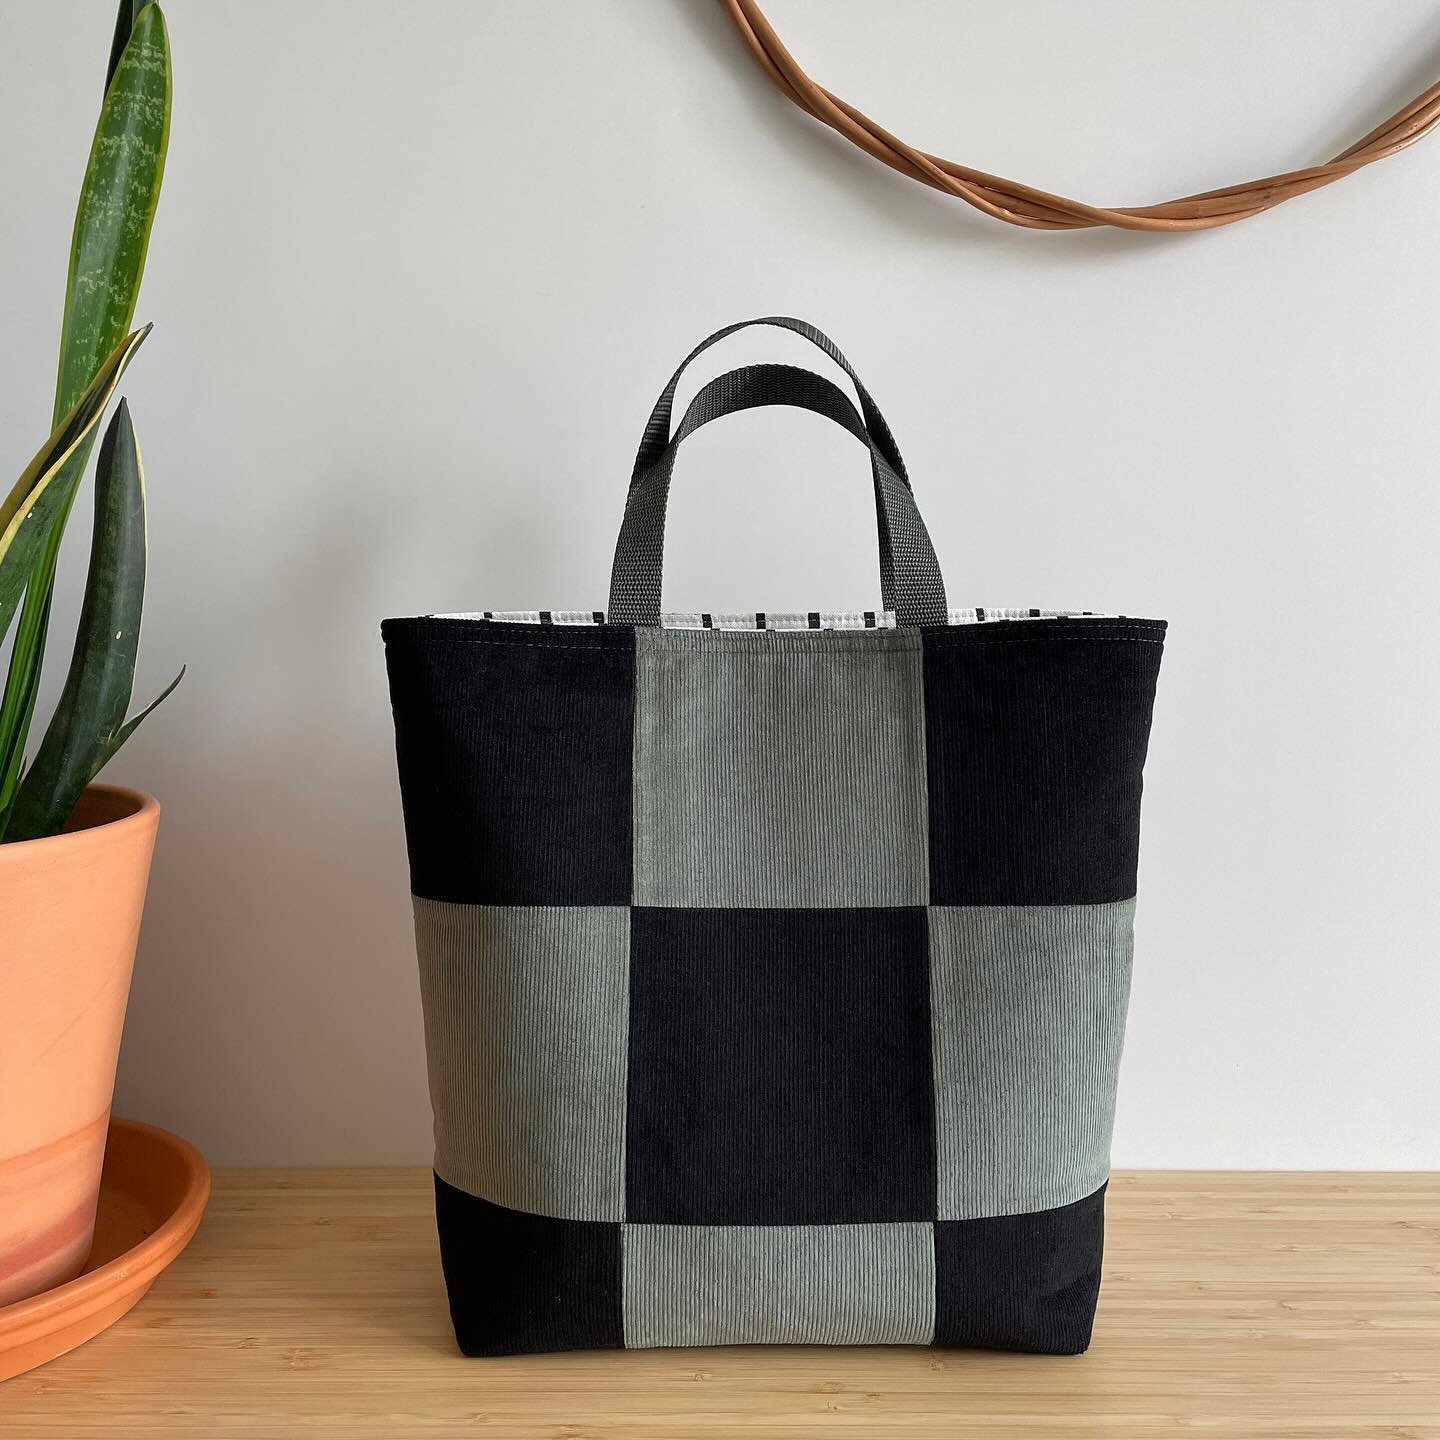 Corduroy Patchwork Tote ❤️.

As soon as I came across all the lovely corduroy over at @sullivanstrim site I knew it would be perfect for a simple, yet wonderfully stylish tote. What do you think? I&rsquo;m quite smitten with this cutie.

Would you li